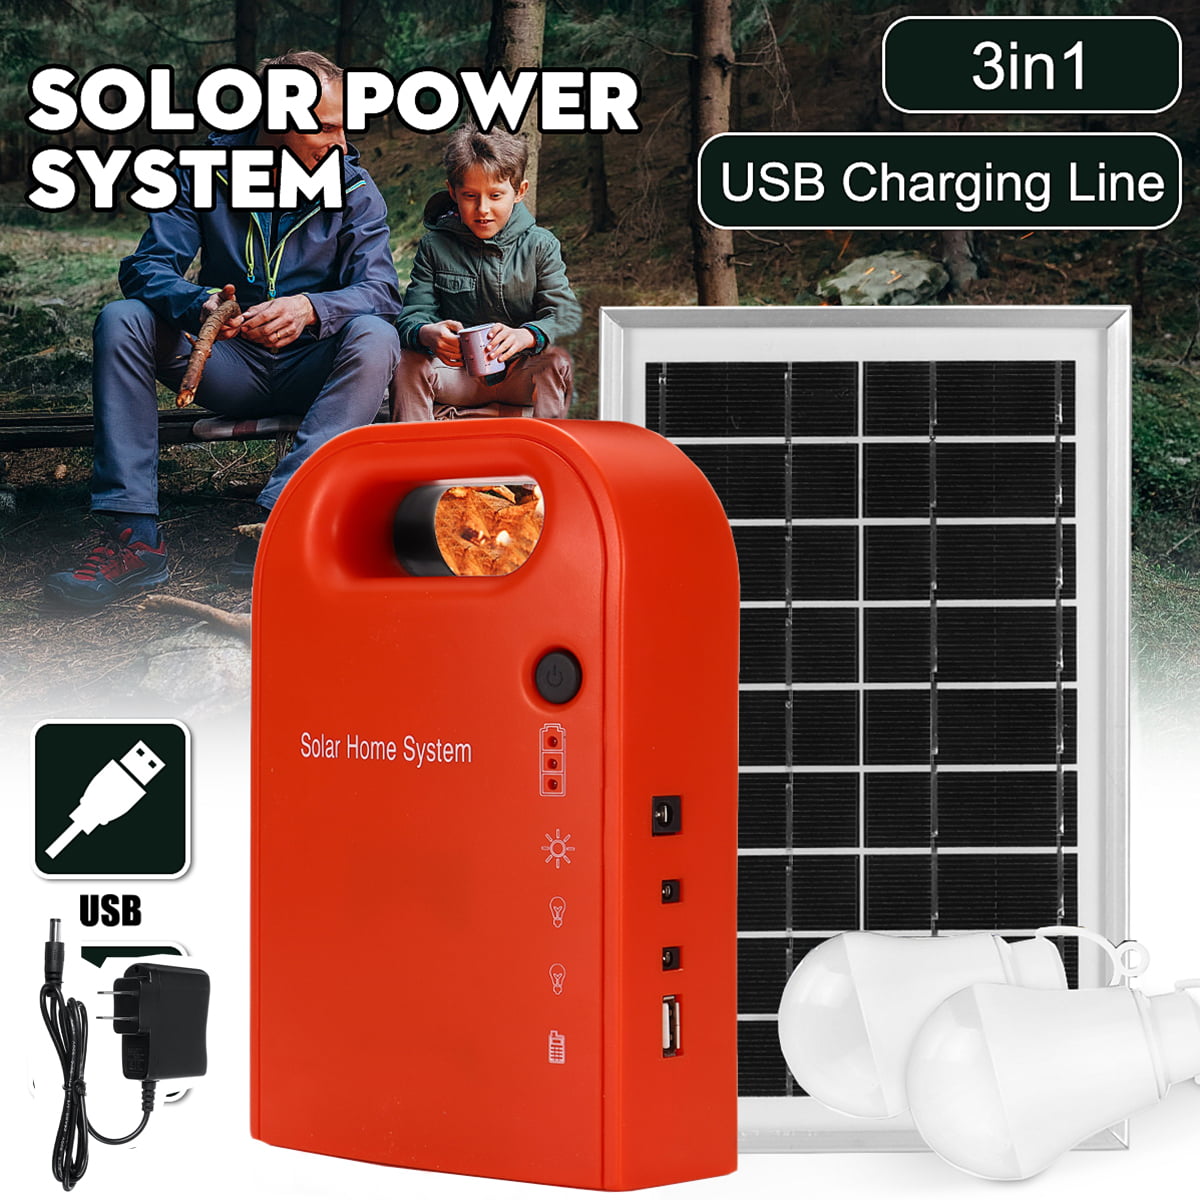 Portable Hanging Generator Camping LED Solar Flash Light Emergency Phone Charger 